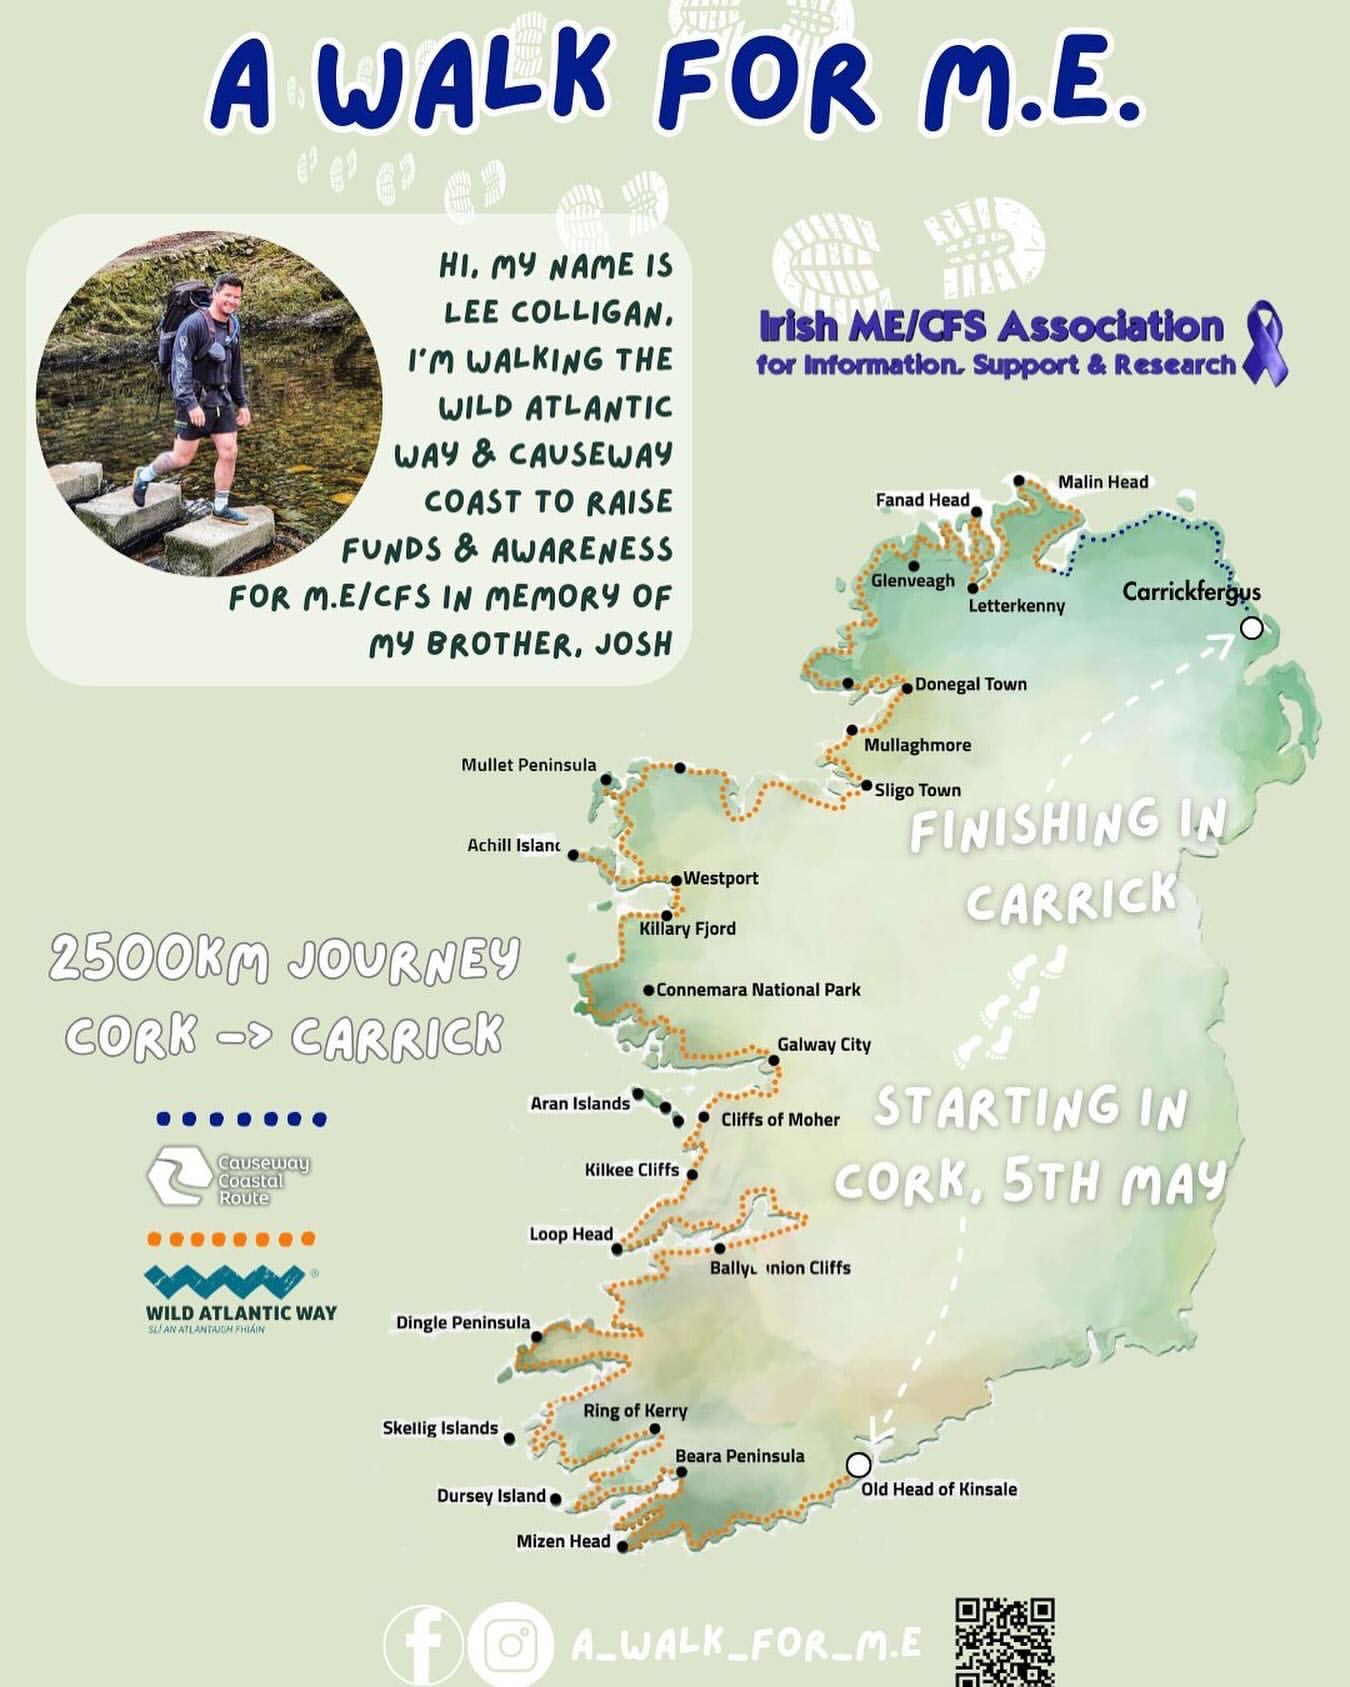 Lee Colligan's walk around Ireland to honour his late brother Josh Colligan and raise money and awareness for ME